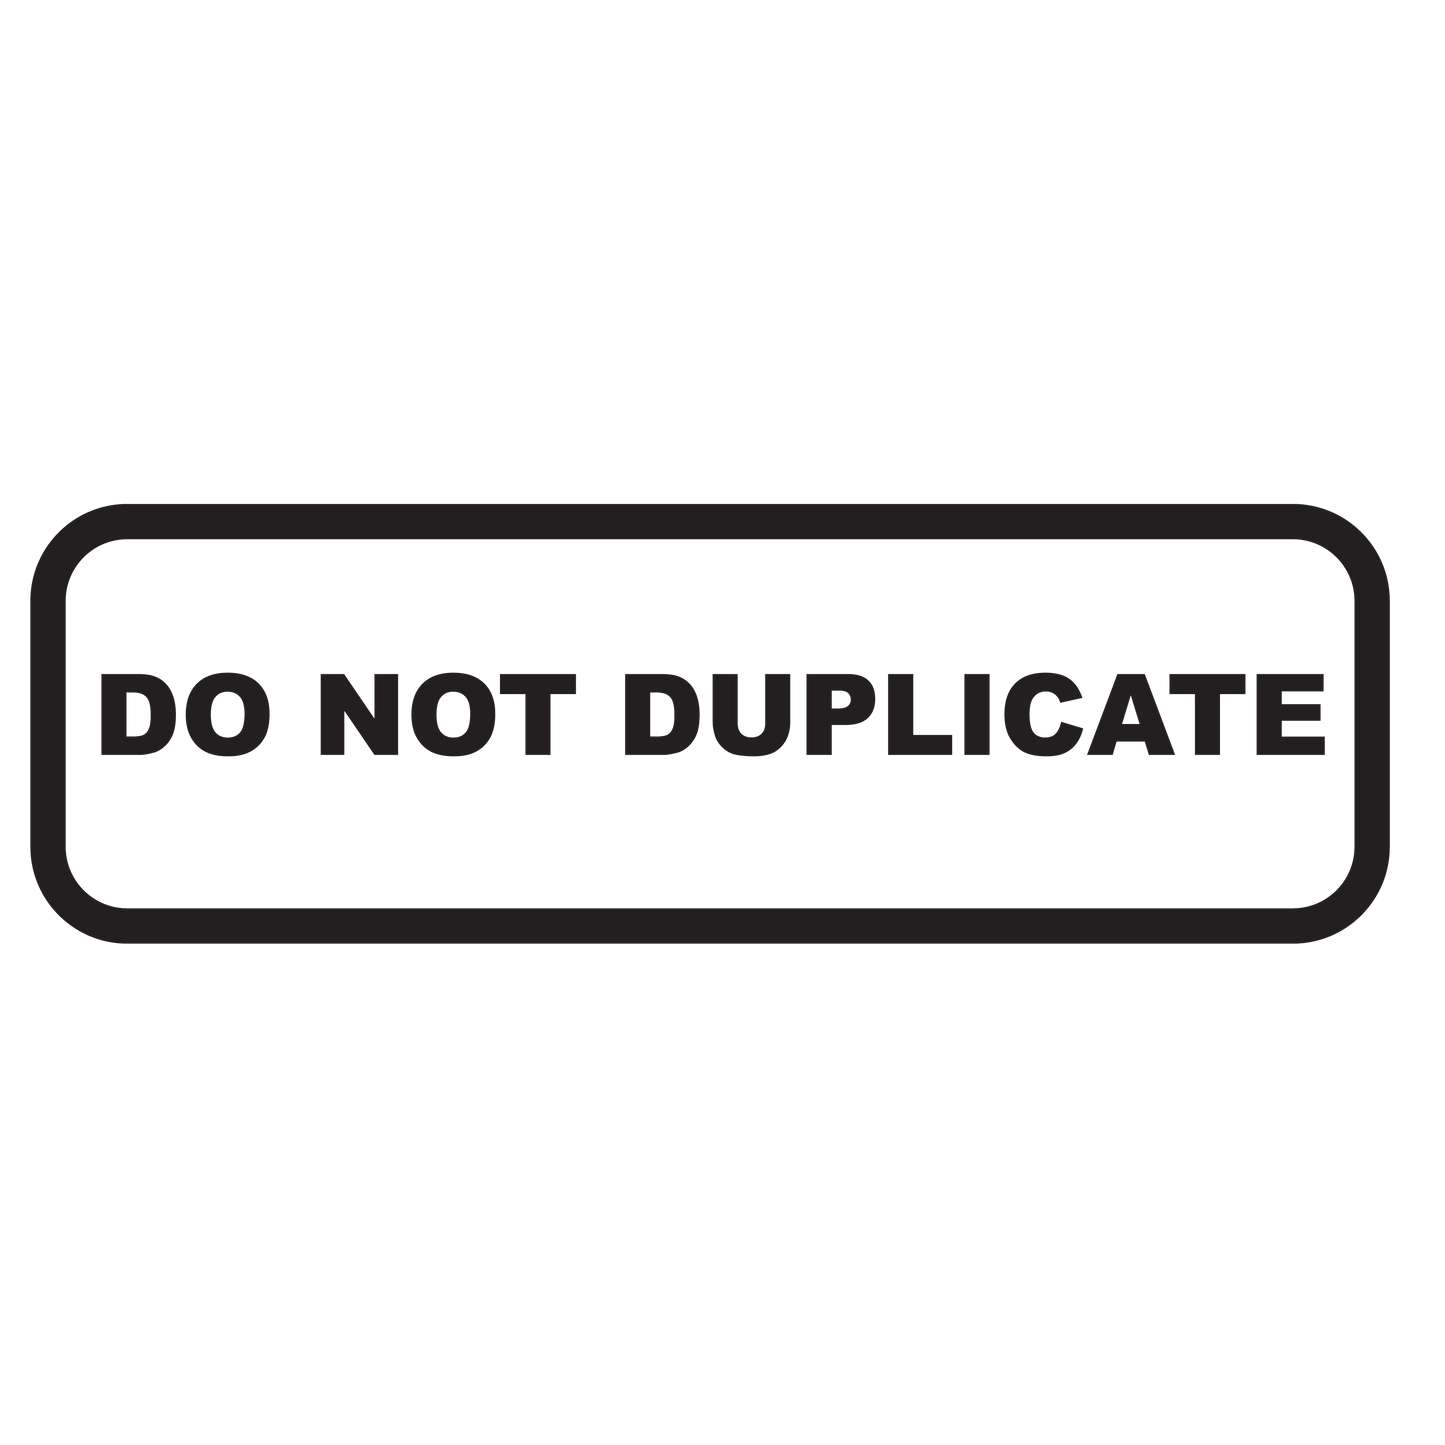 Rounded Box DO NOT DUPLICATE Stamp